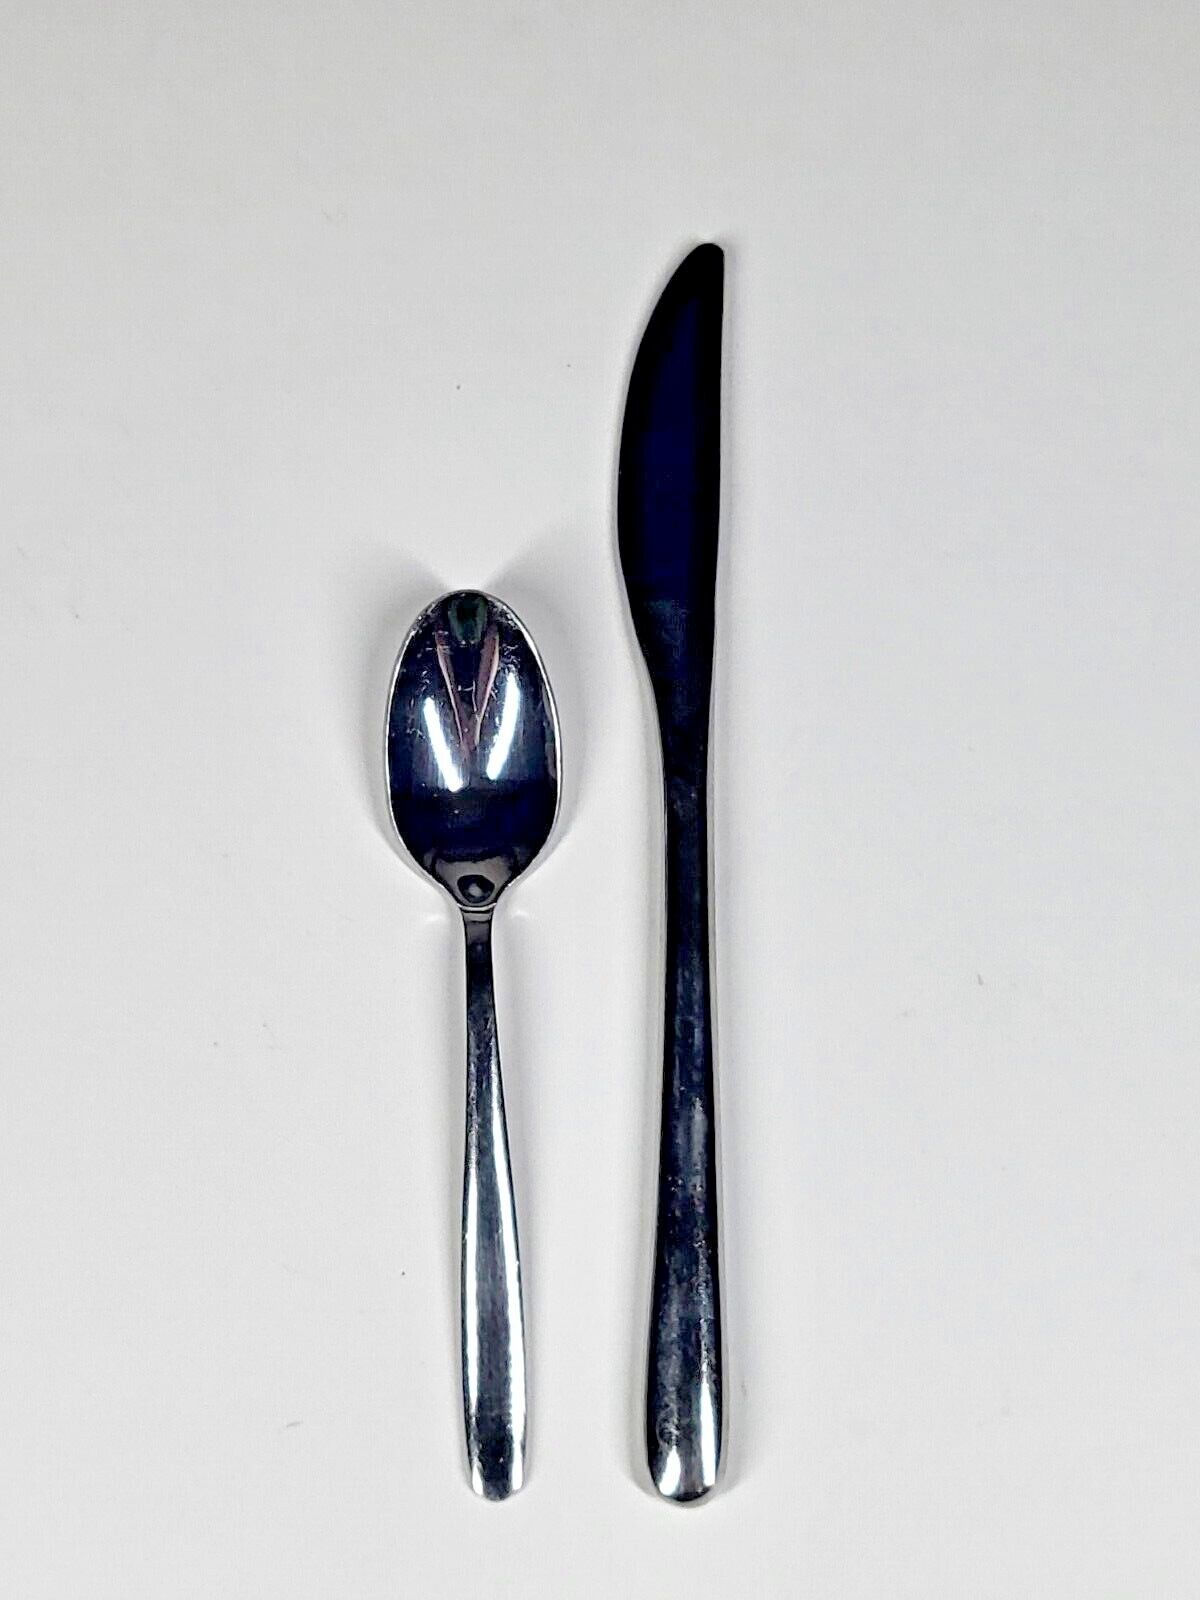 Lufthansa Airline Flatware Spoon Knife In Flight Meals Stainless Vintage